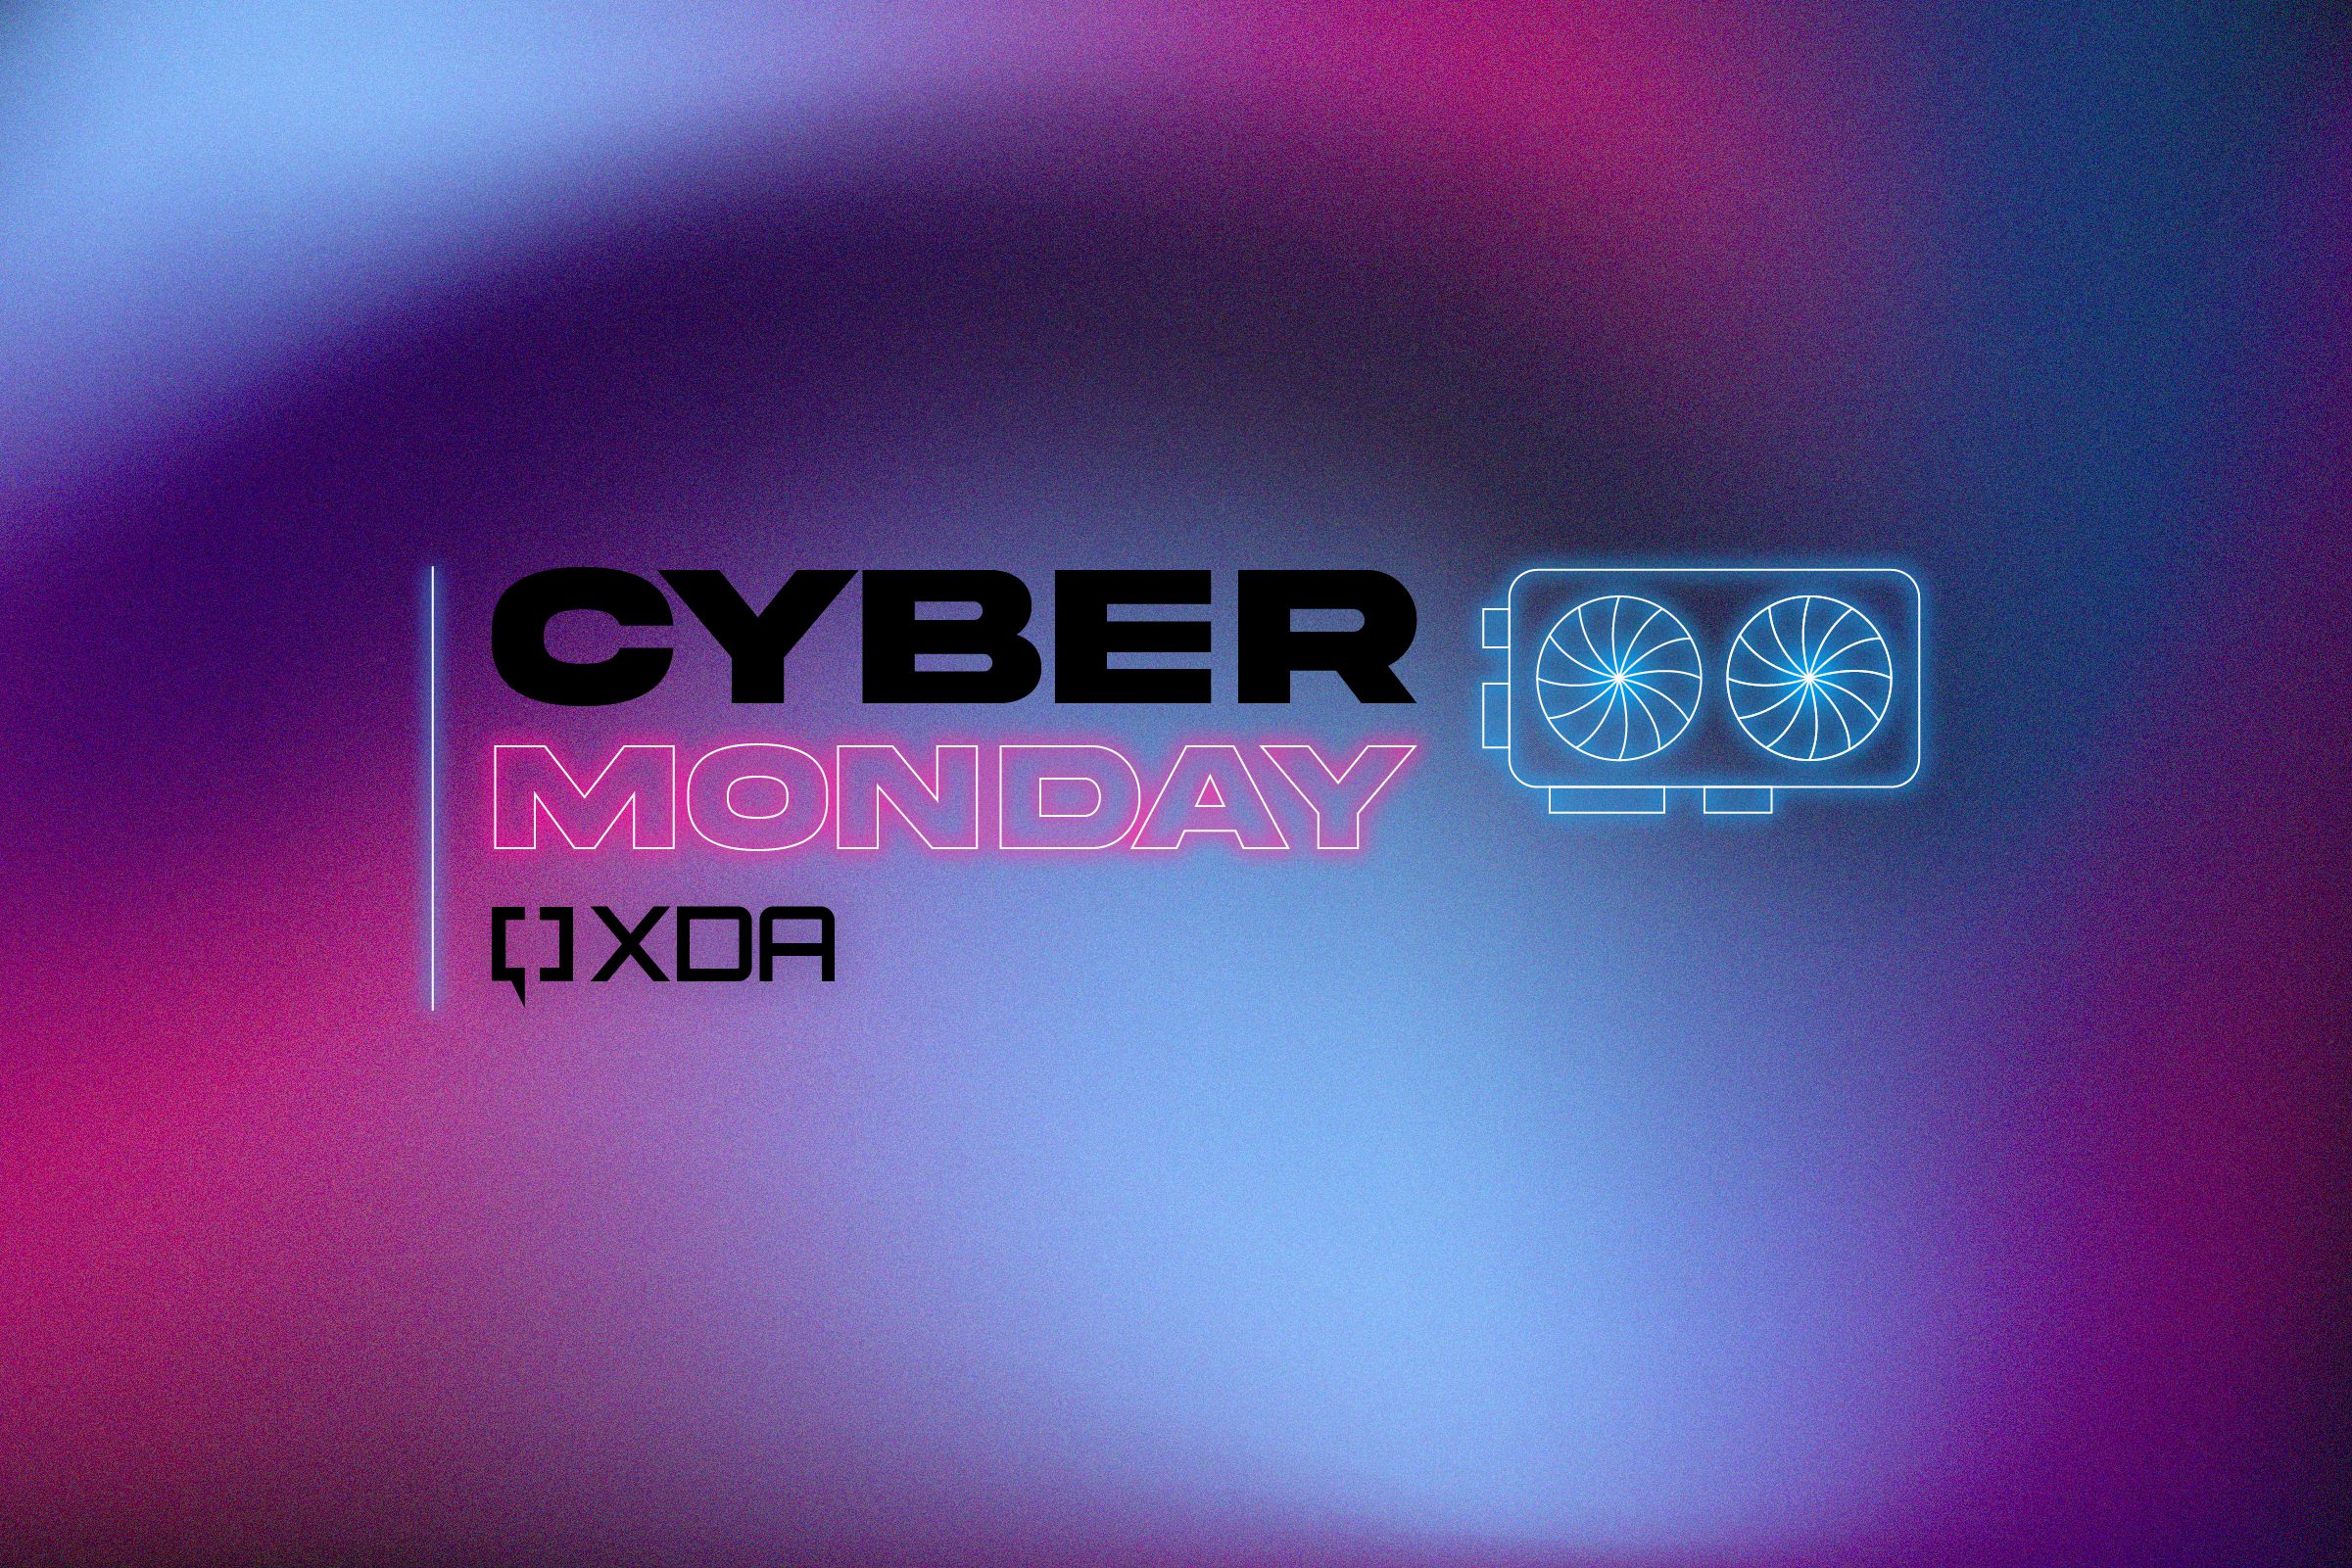 Cyber Monday graphics card deals